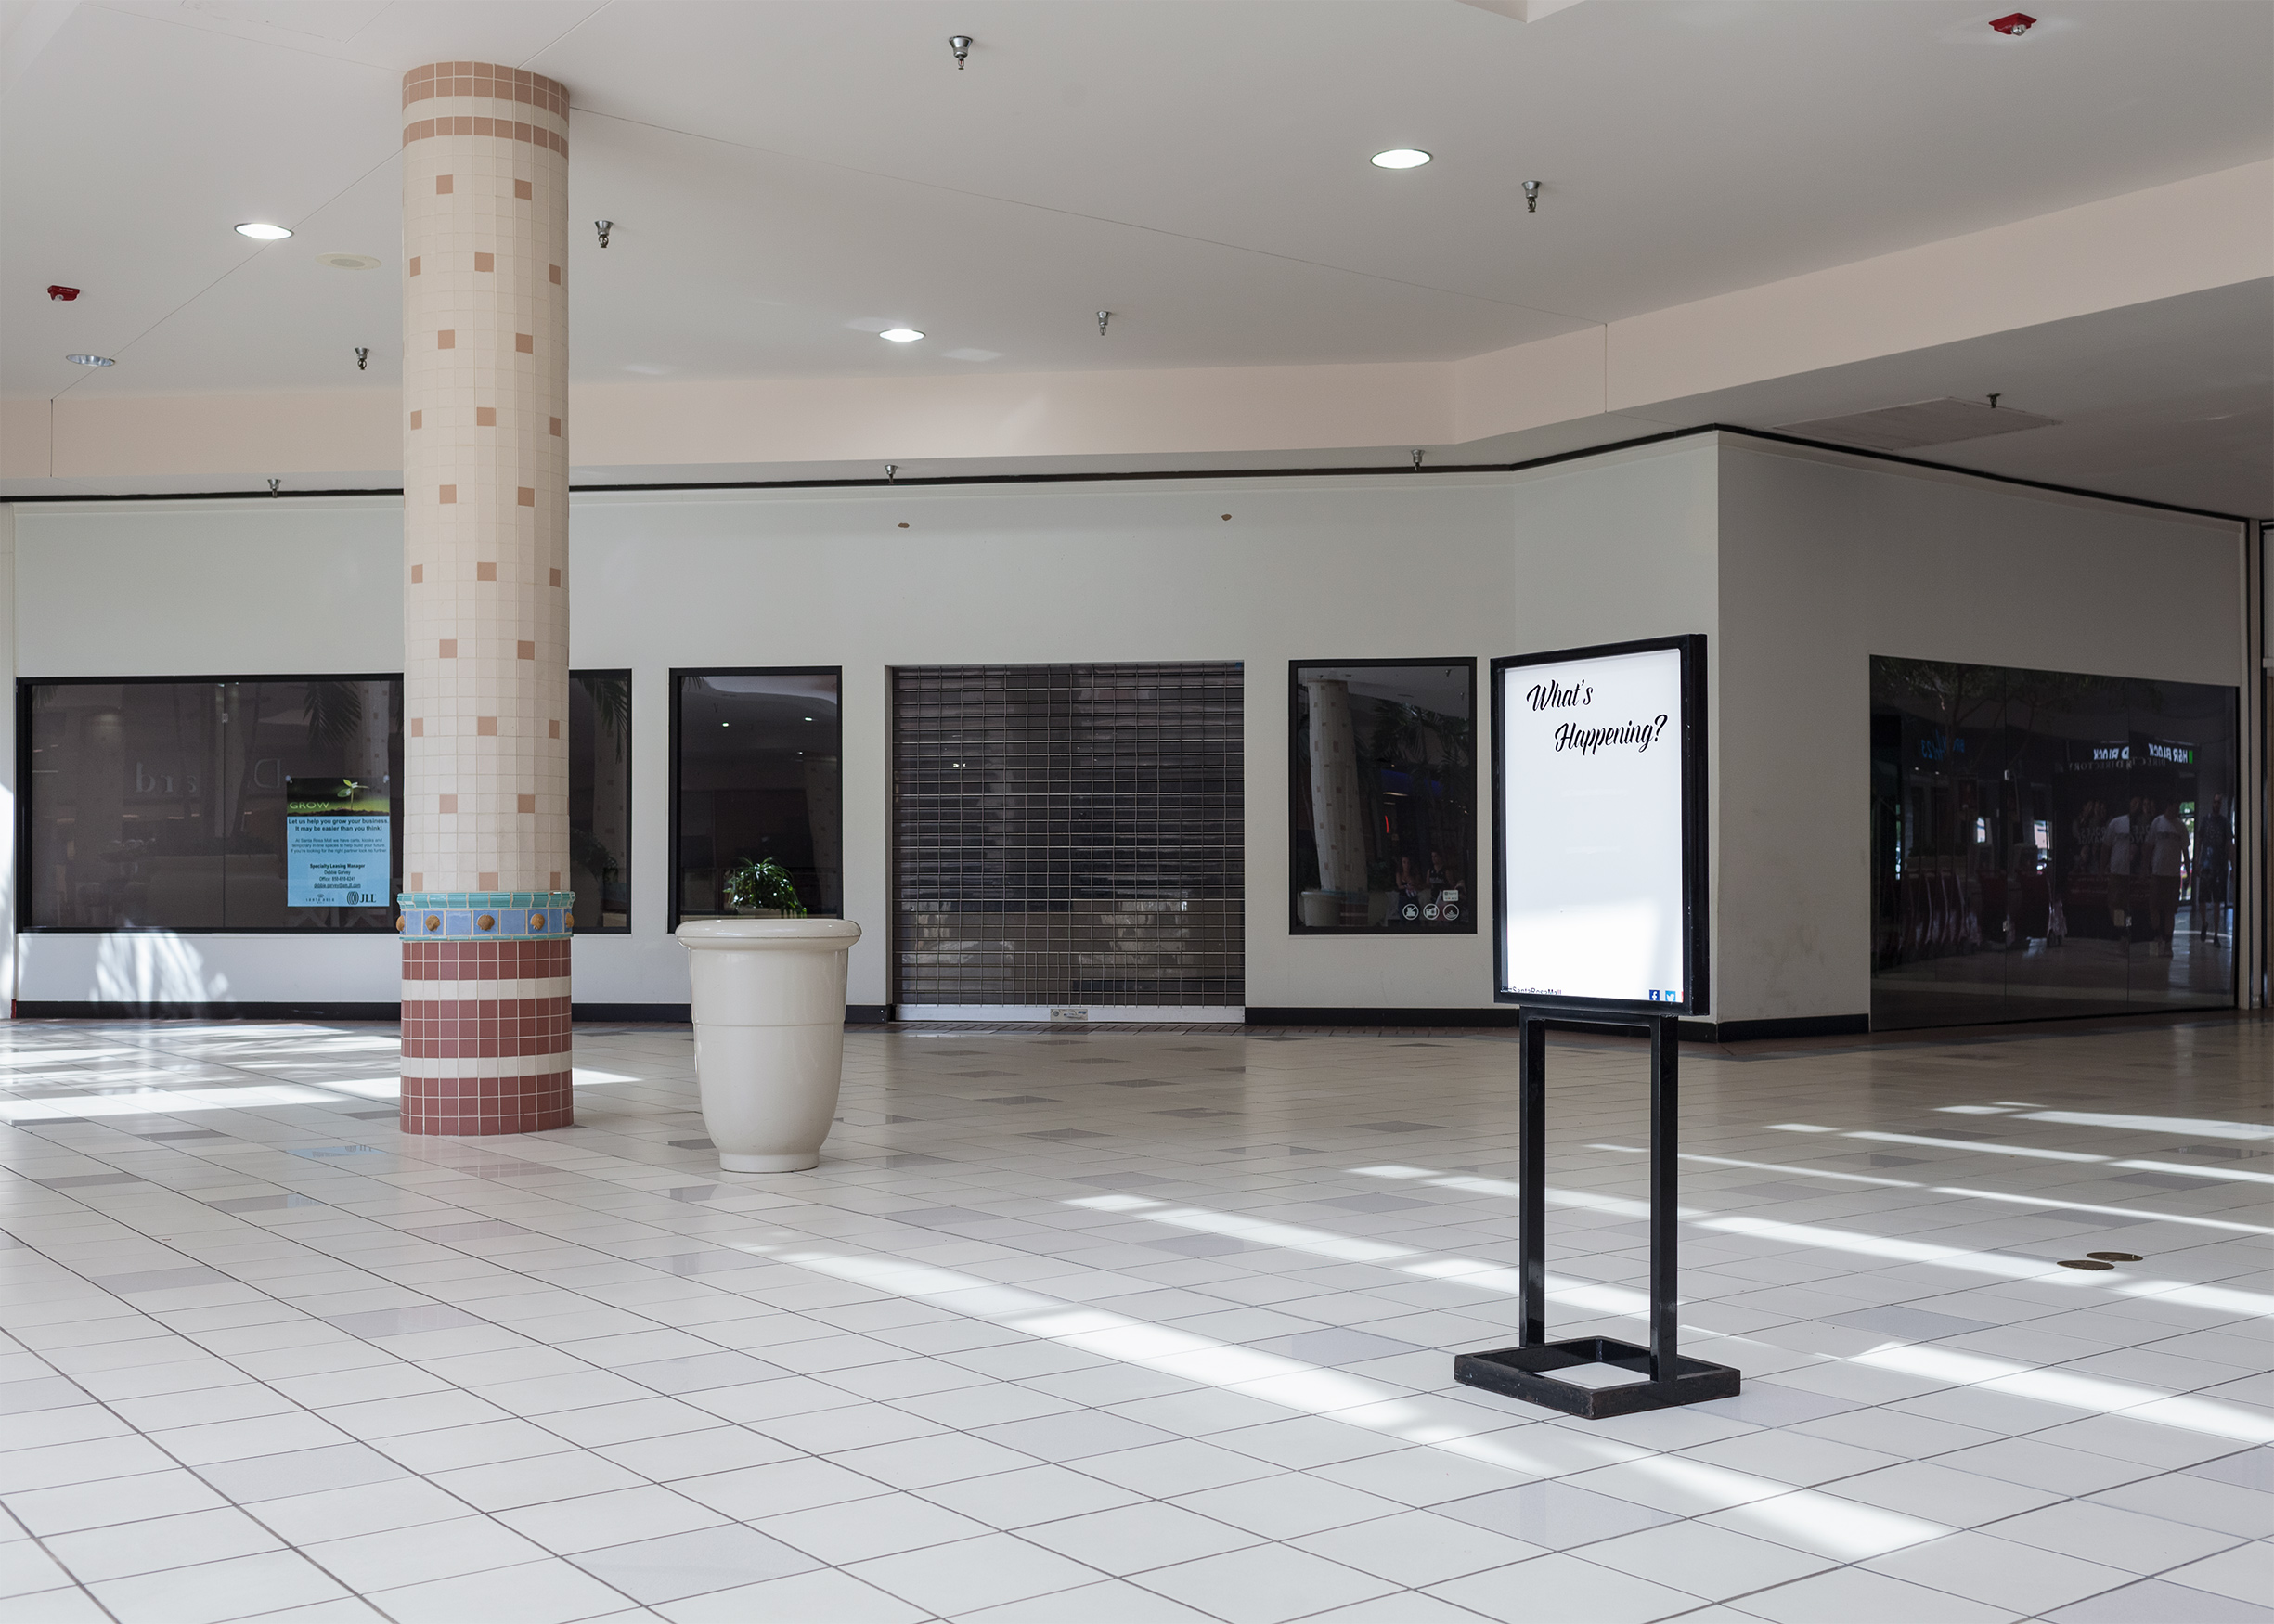 An interior scene in Santa Rosa Mall in Mary Esther, FL on July 10, 2017 (Brian Ulrich for TIME)